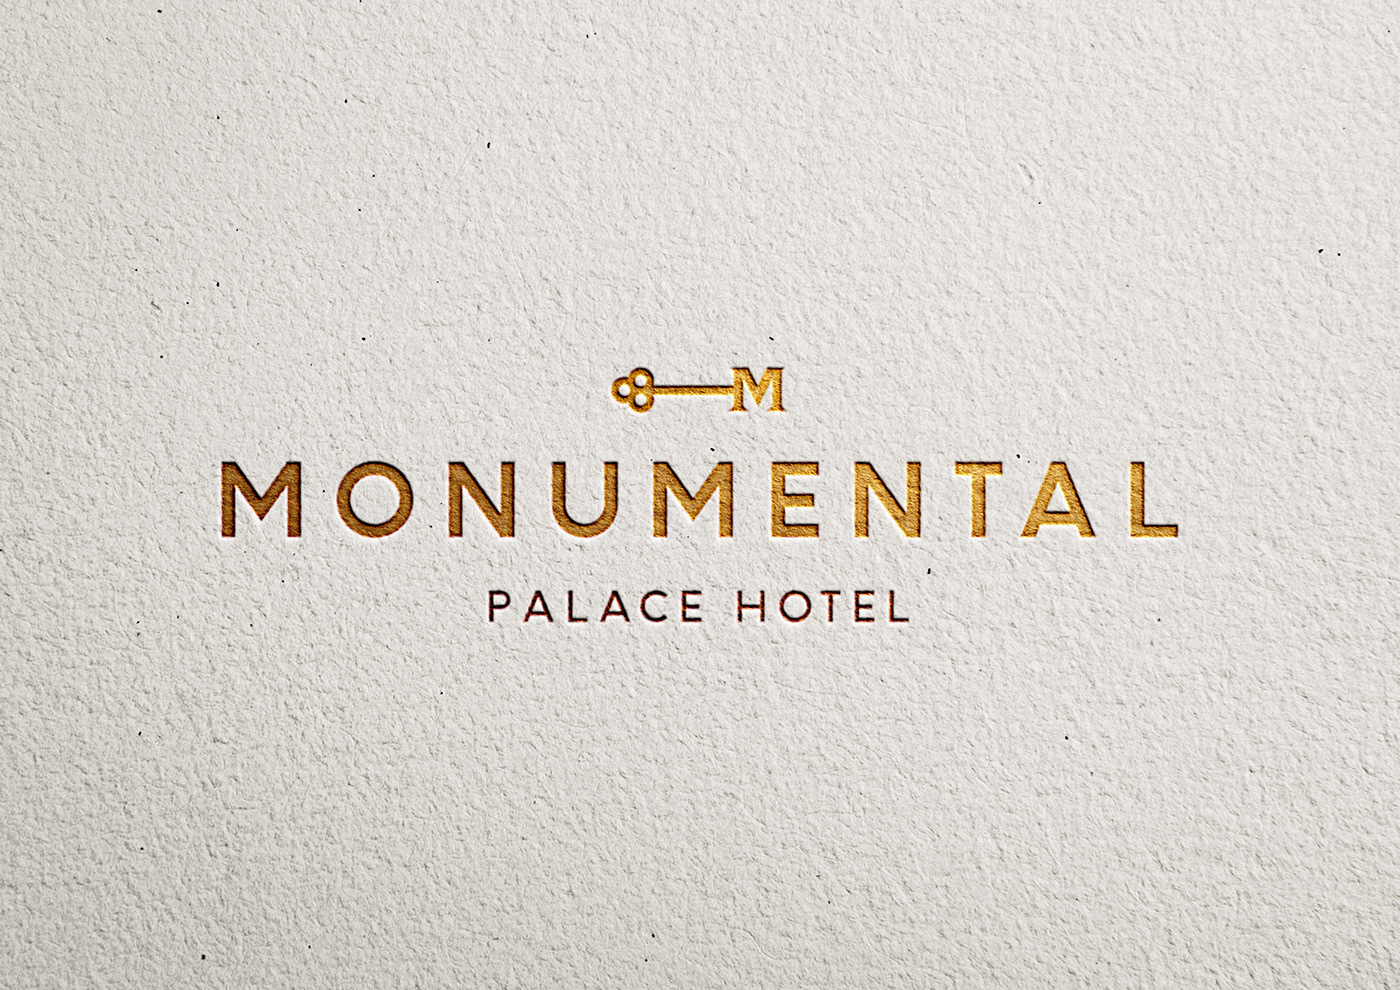 hotel monumental palace Hospitality branding  Business Cards letterhead Advertising  Signage